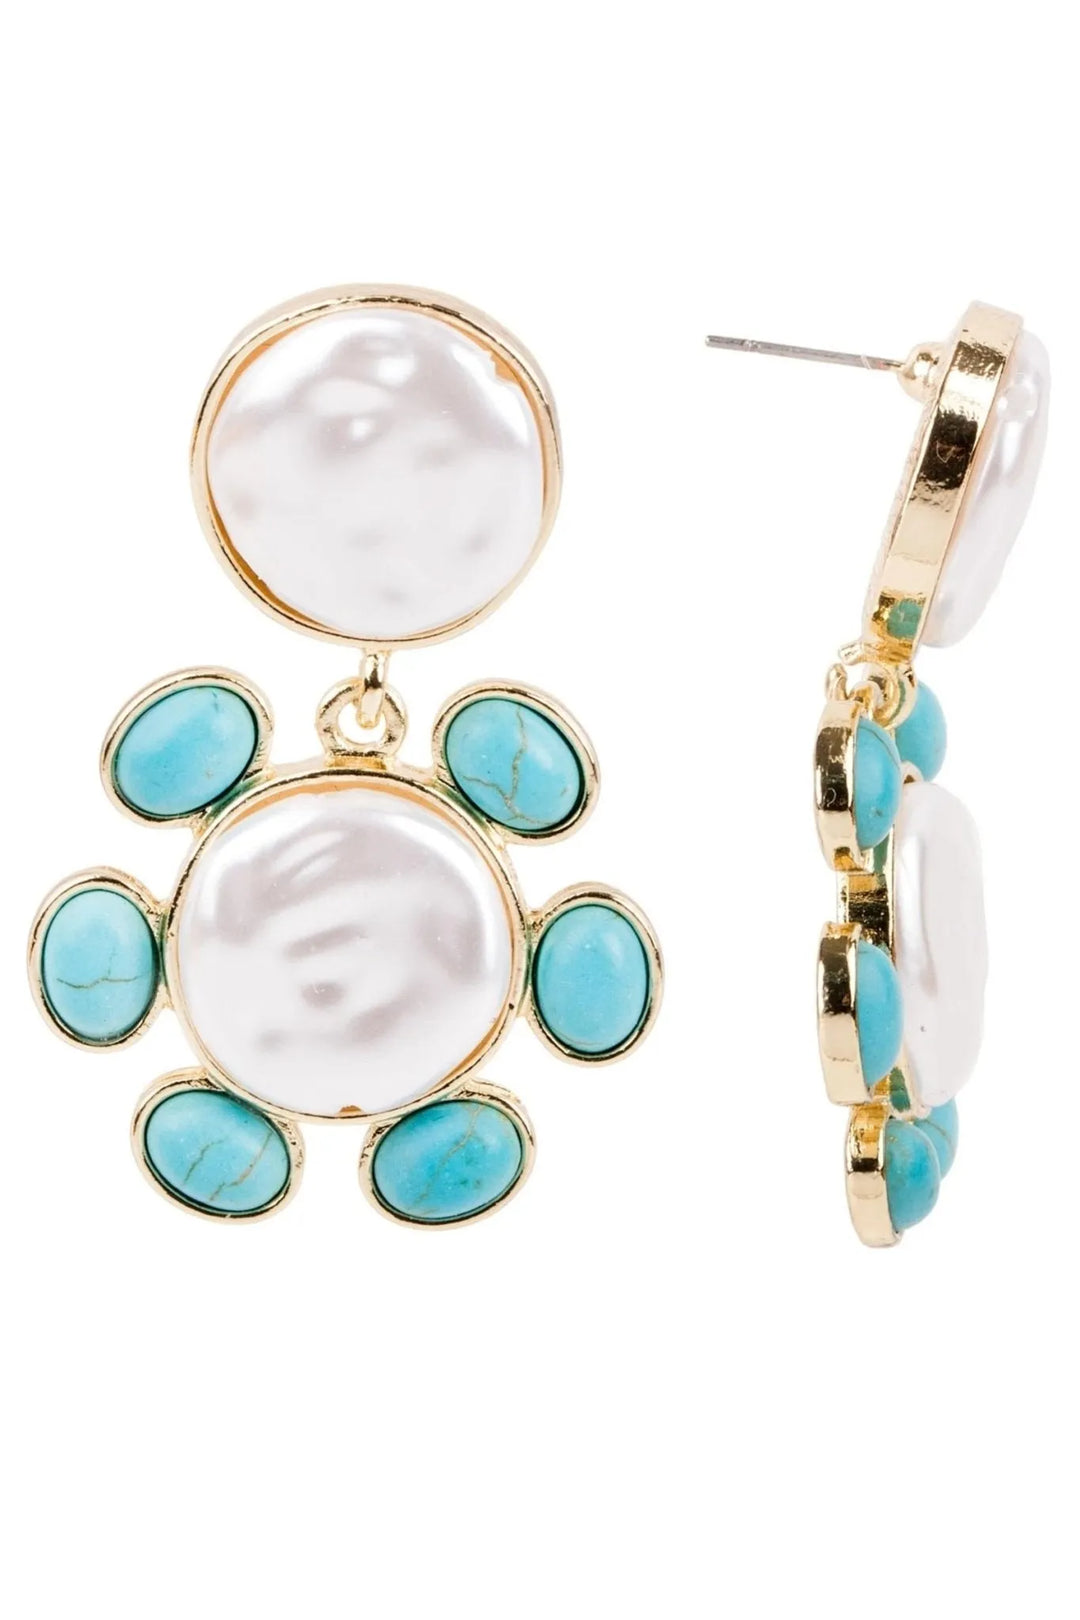 Cadence Pearl Earring Turquoise